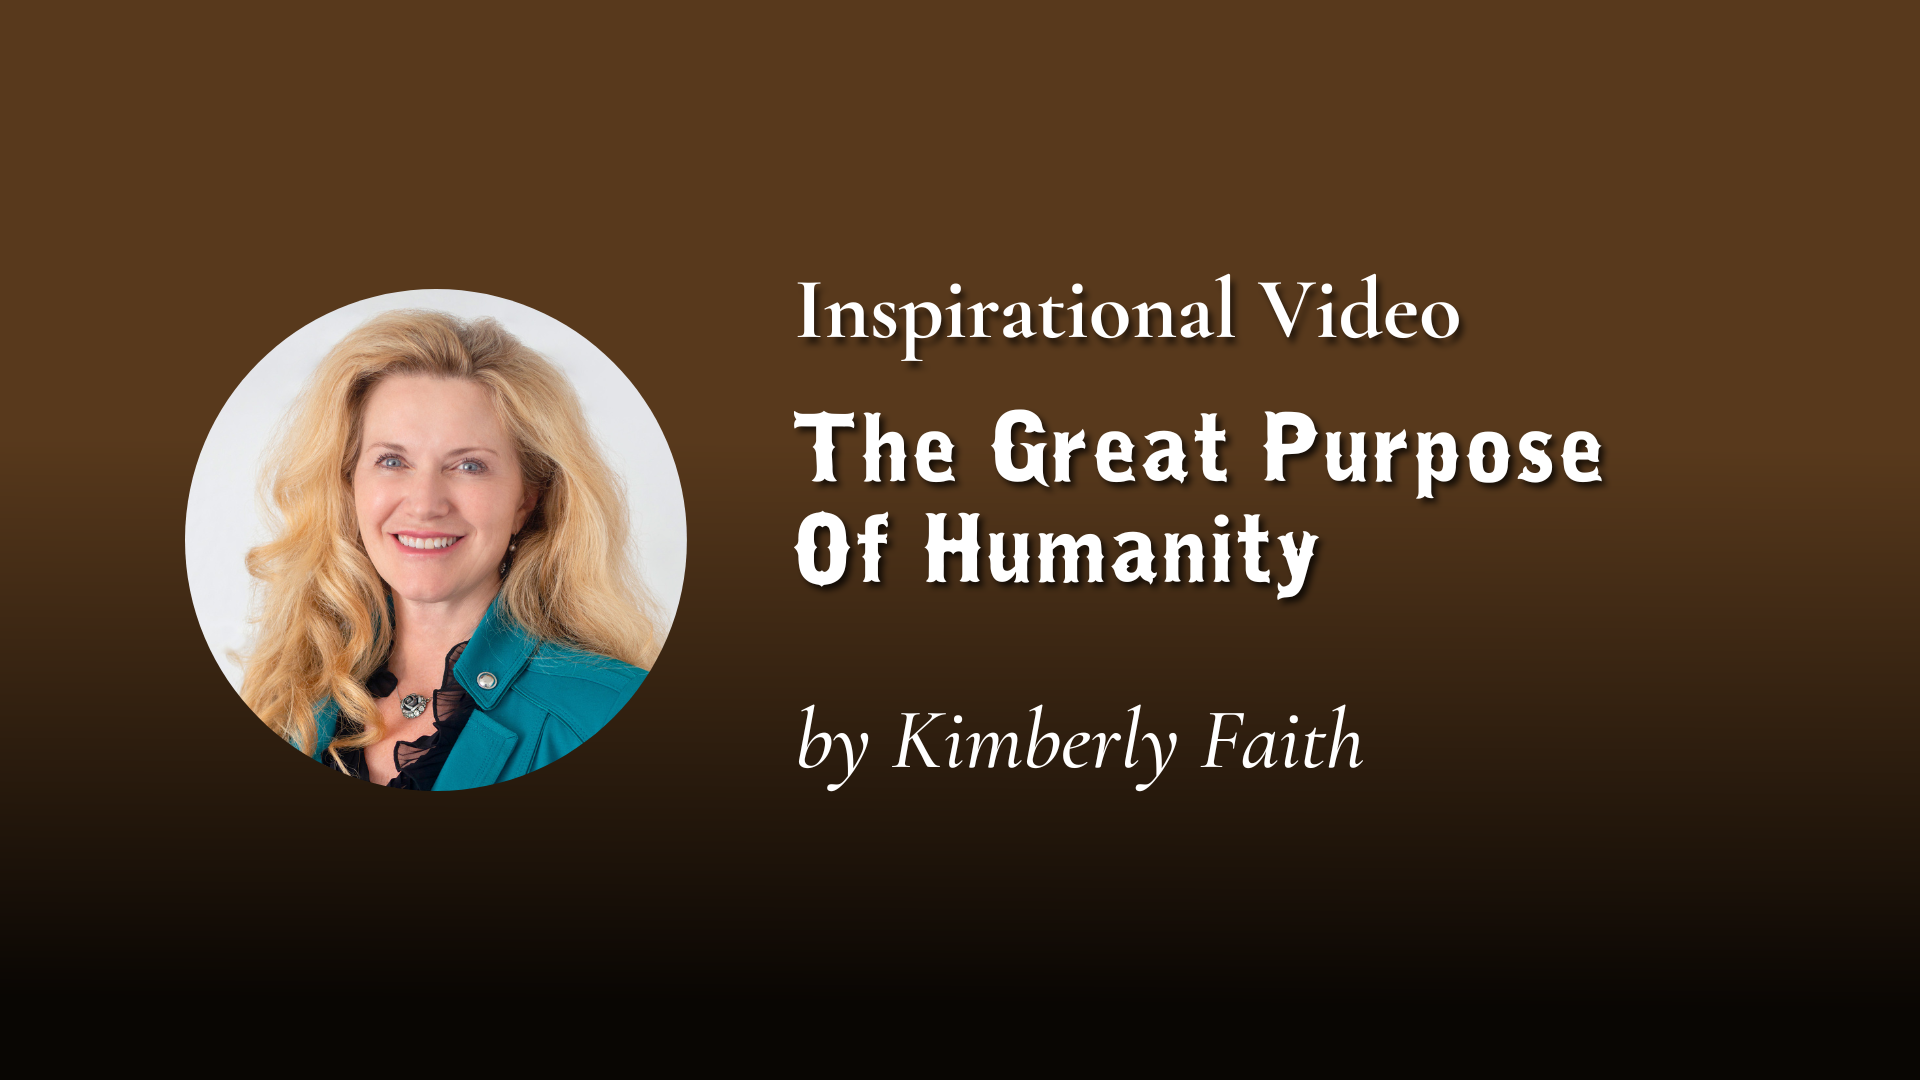 The Great Purpose Of Humanity